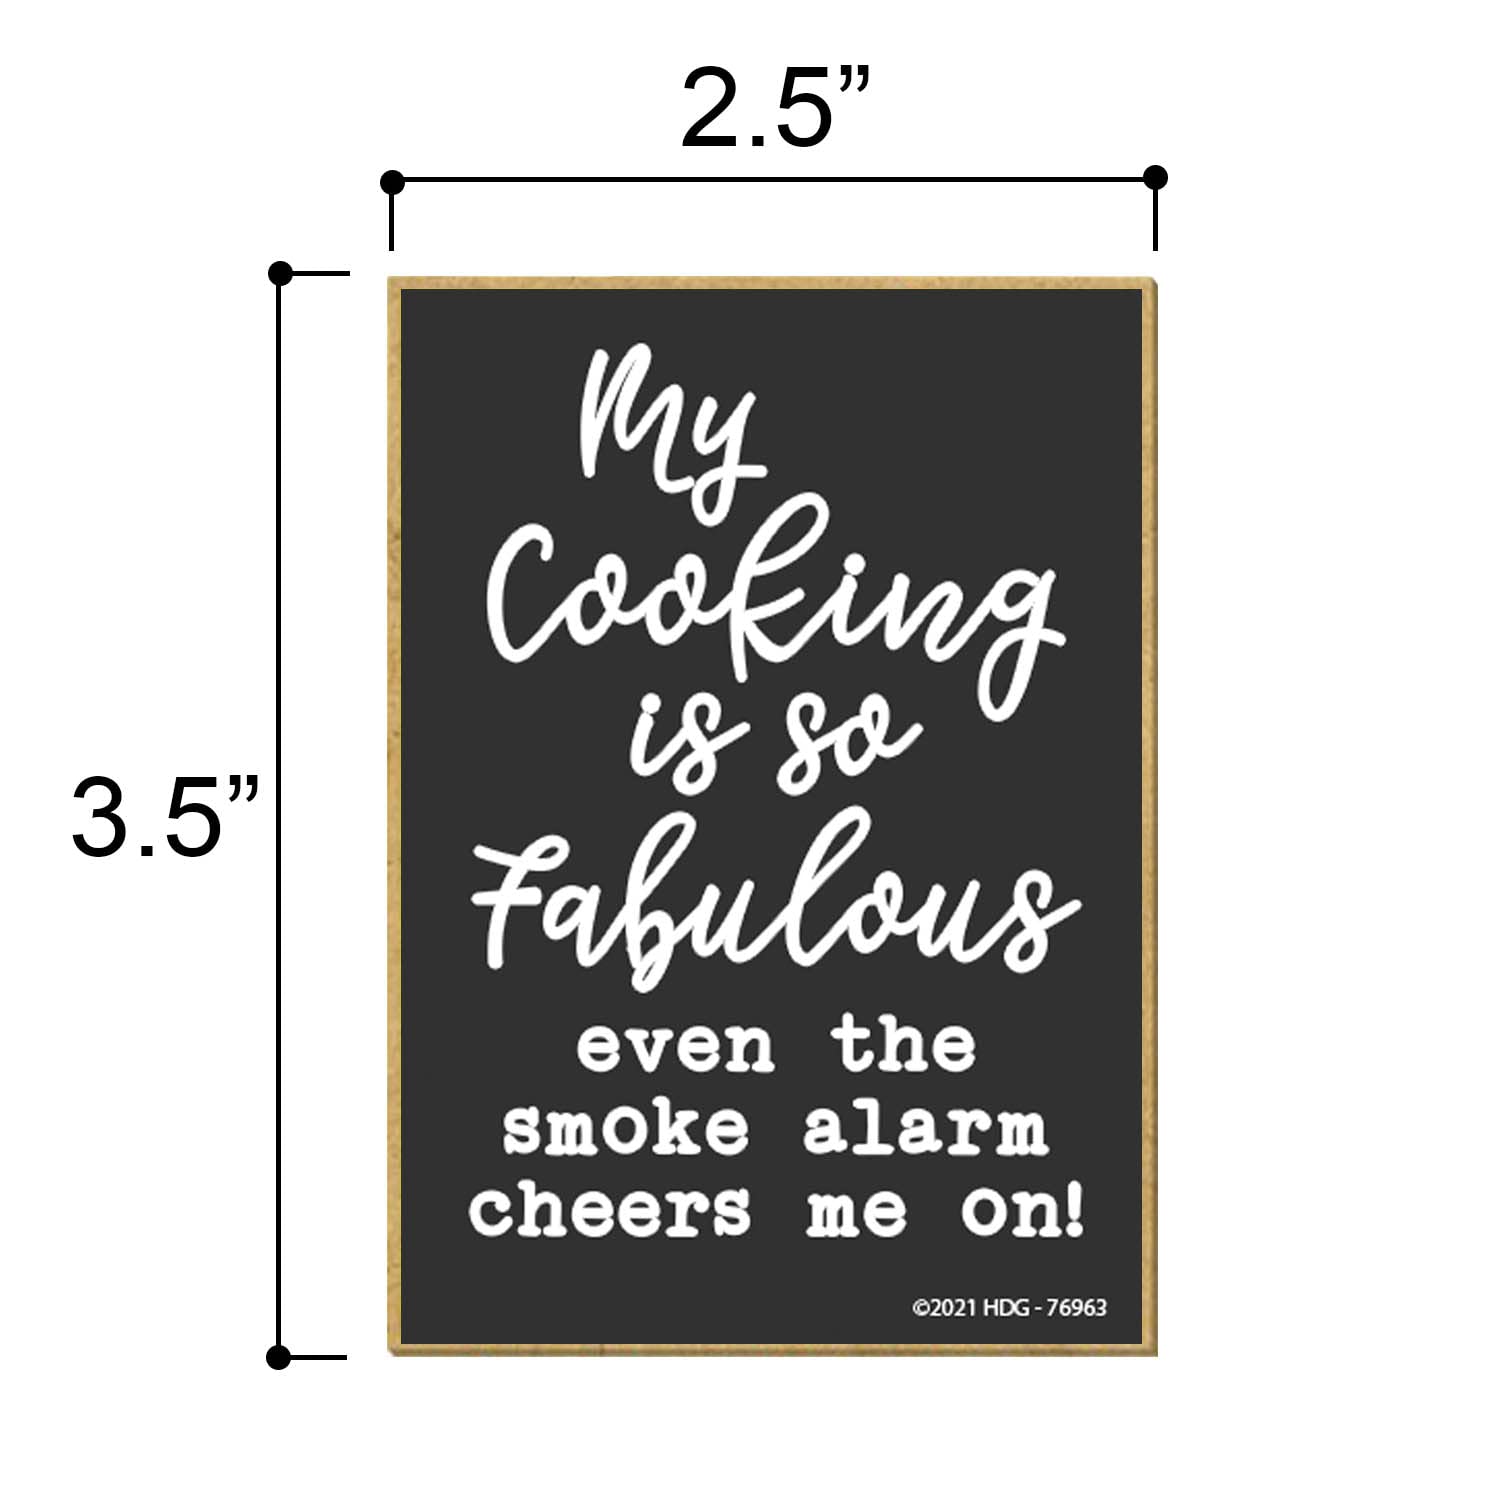 Honey Dew Gifts, My Cooking is so Fabulous Even The Smoke Alarm Cheers Me On, 2.5 Inches by 3.5 Inches, Made in USA, Mom Magnet, Refrigerator Magnets, Decorative Magnets, Funny Magnets, Funny Fridge